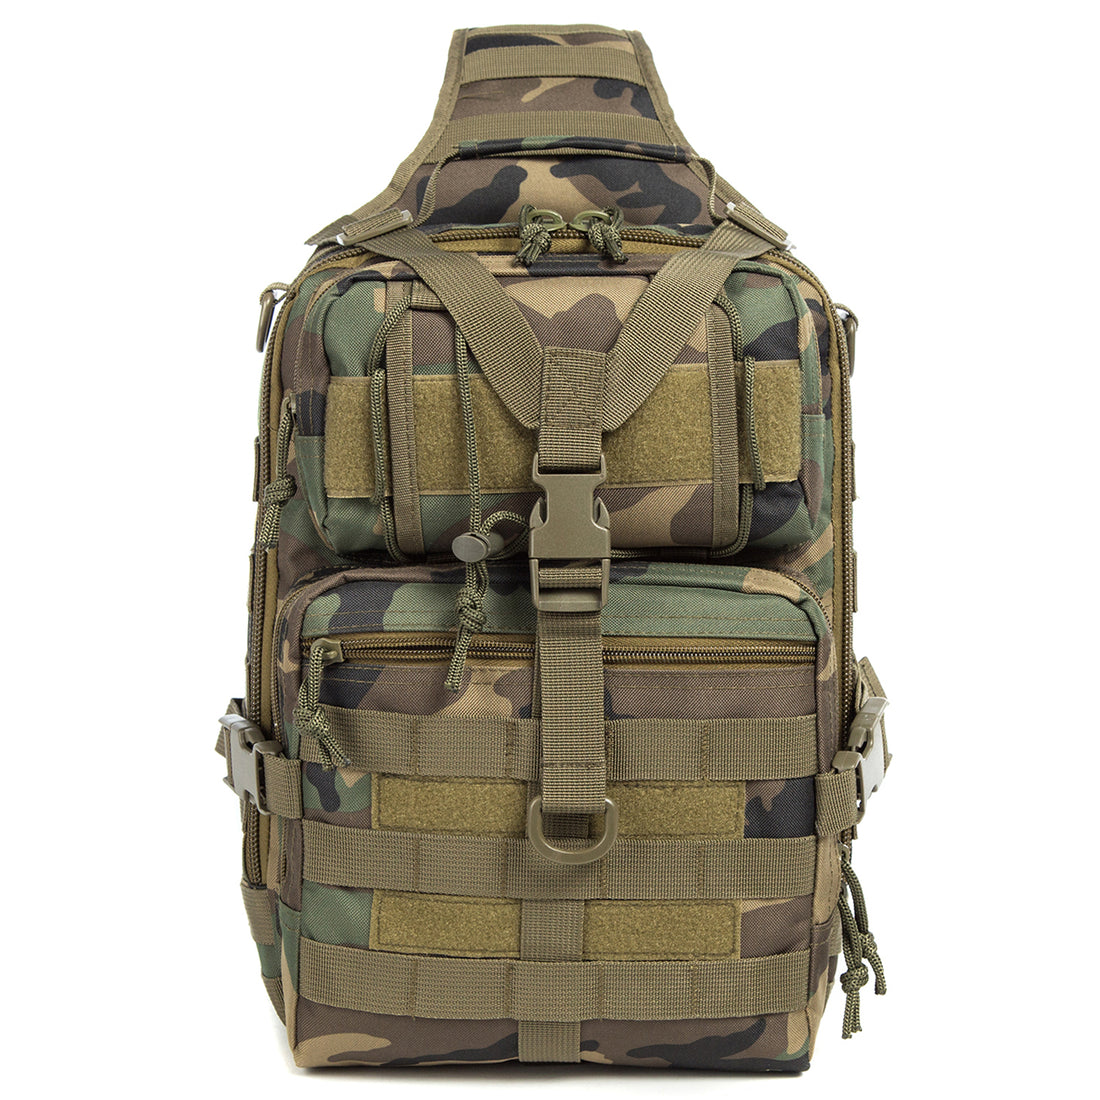 J.CARP Tactical EDC Sling Bag Pack, Military Rover Shoulder Molle Backpack, with USA Flag Patch, Jungle Camouflage